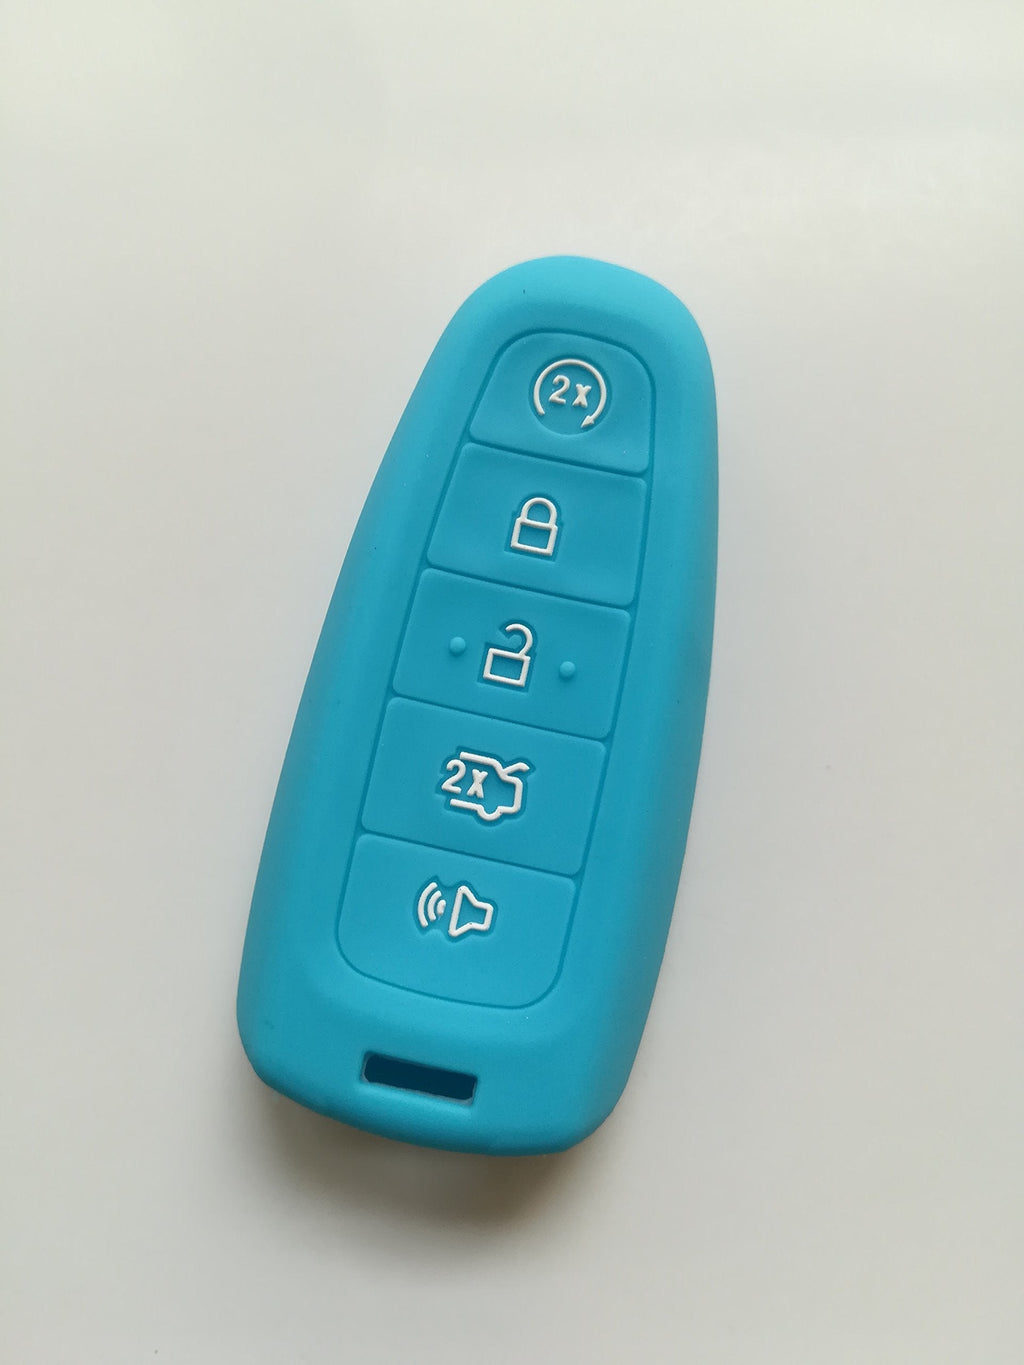  [AUSTRALIA] - Sky Blue Silicone Fob Skin Key Cover for Lincoln Ford Escape Explorer Focus Taurus Flex 5 Buttons Fob Remote Keyless Entry Smart Key Case Shell Key Protector Key Jacket